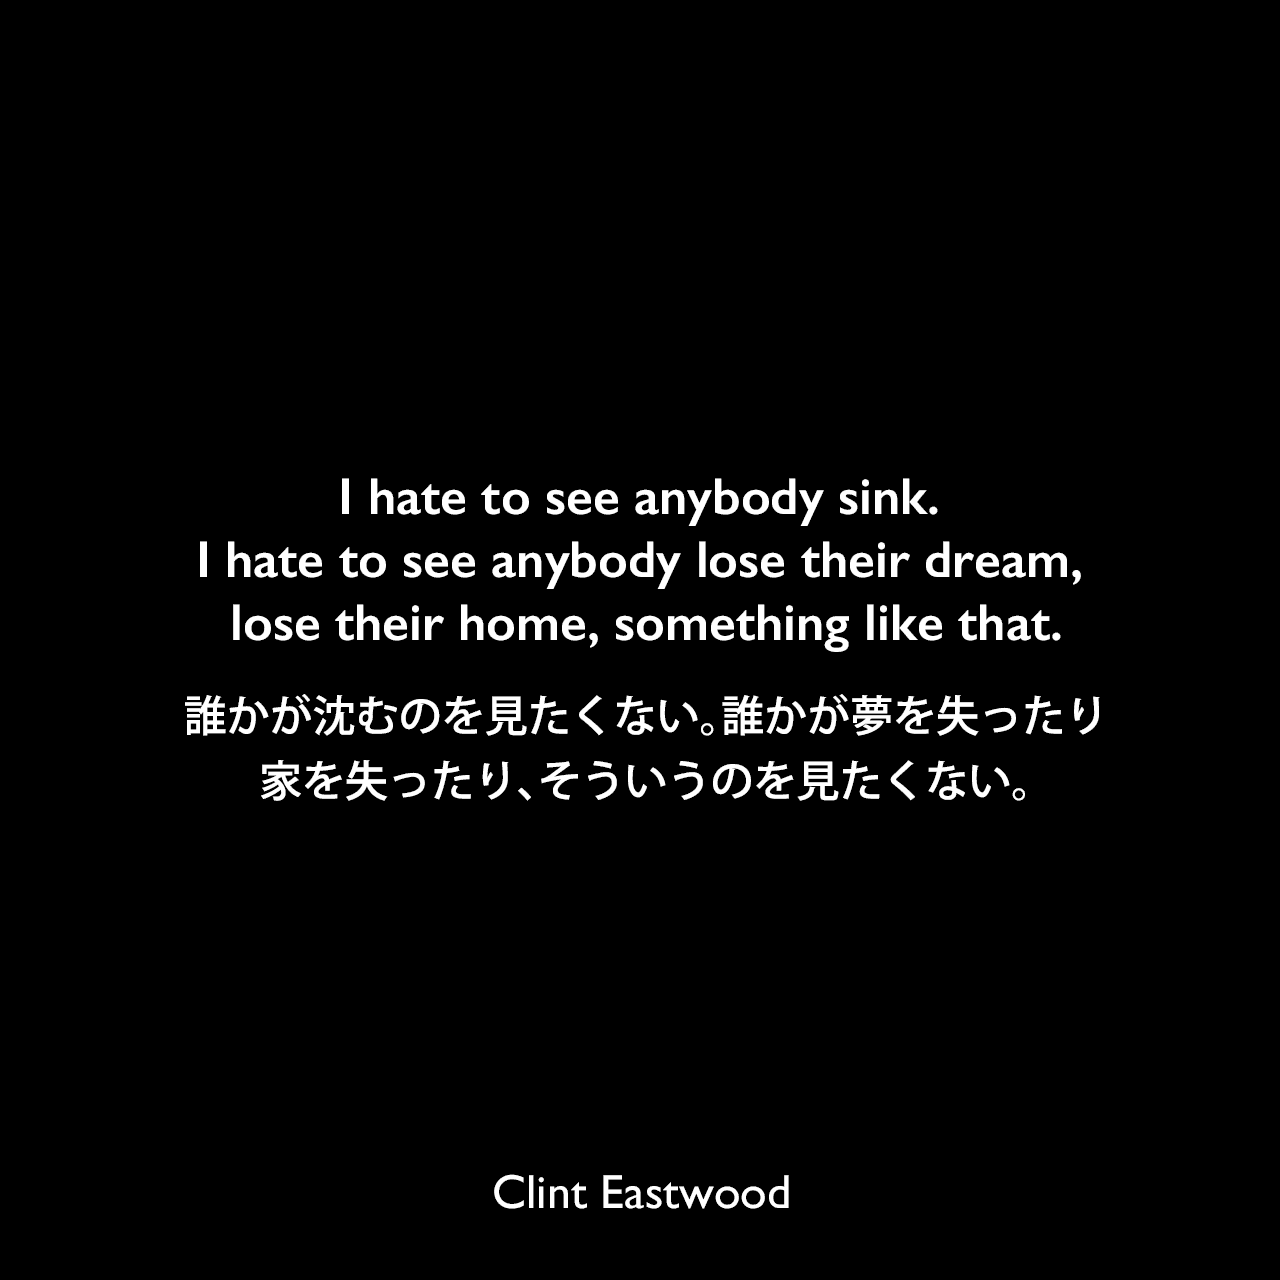 I hate to see anybody sink. I hate to see anybody lose their dream, lose their home, something like that.誰かが沈むのを見たくない。誰かが夢を失ったり、家を失ったり、そういうのを見たくない。Clint Eastwood